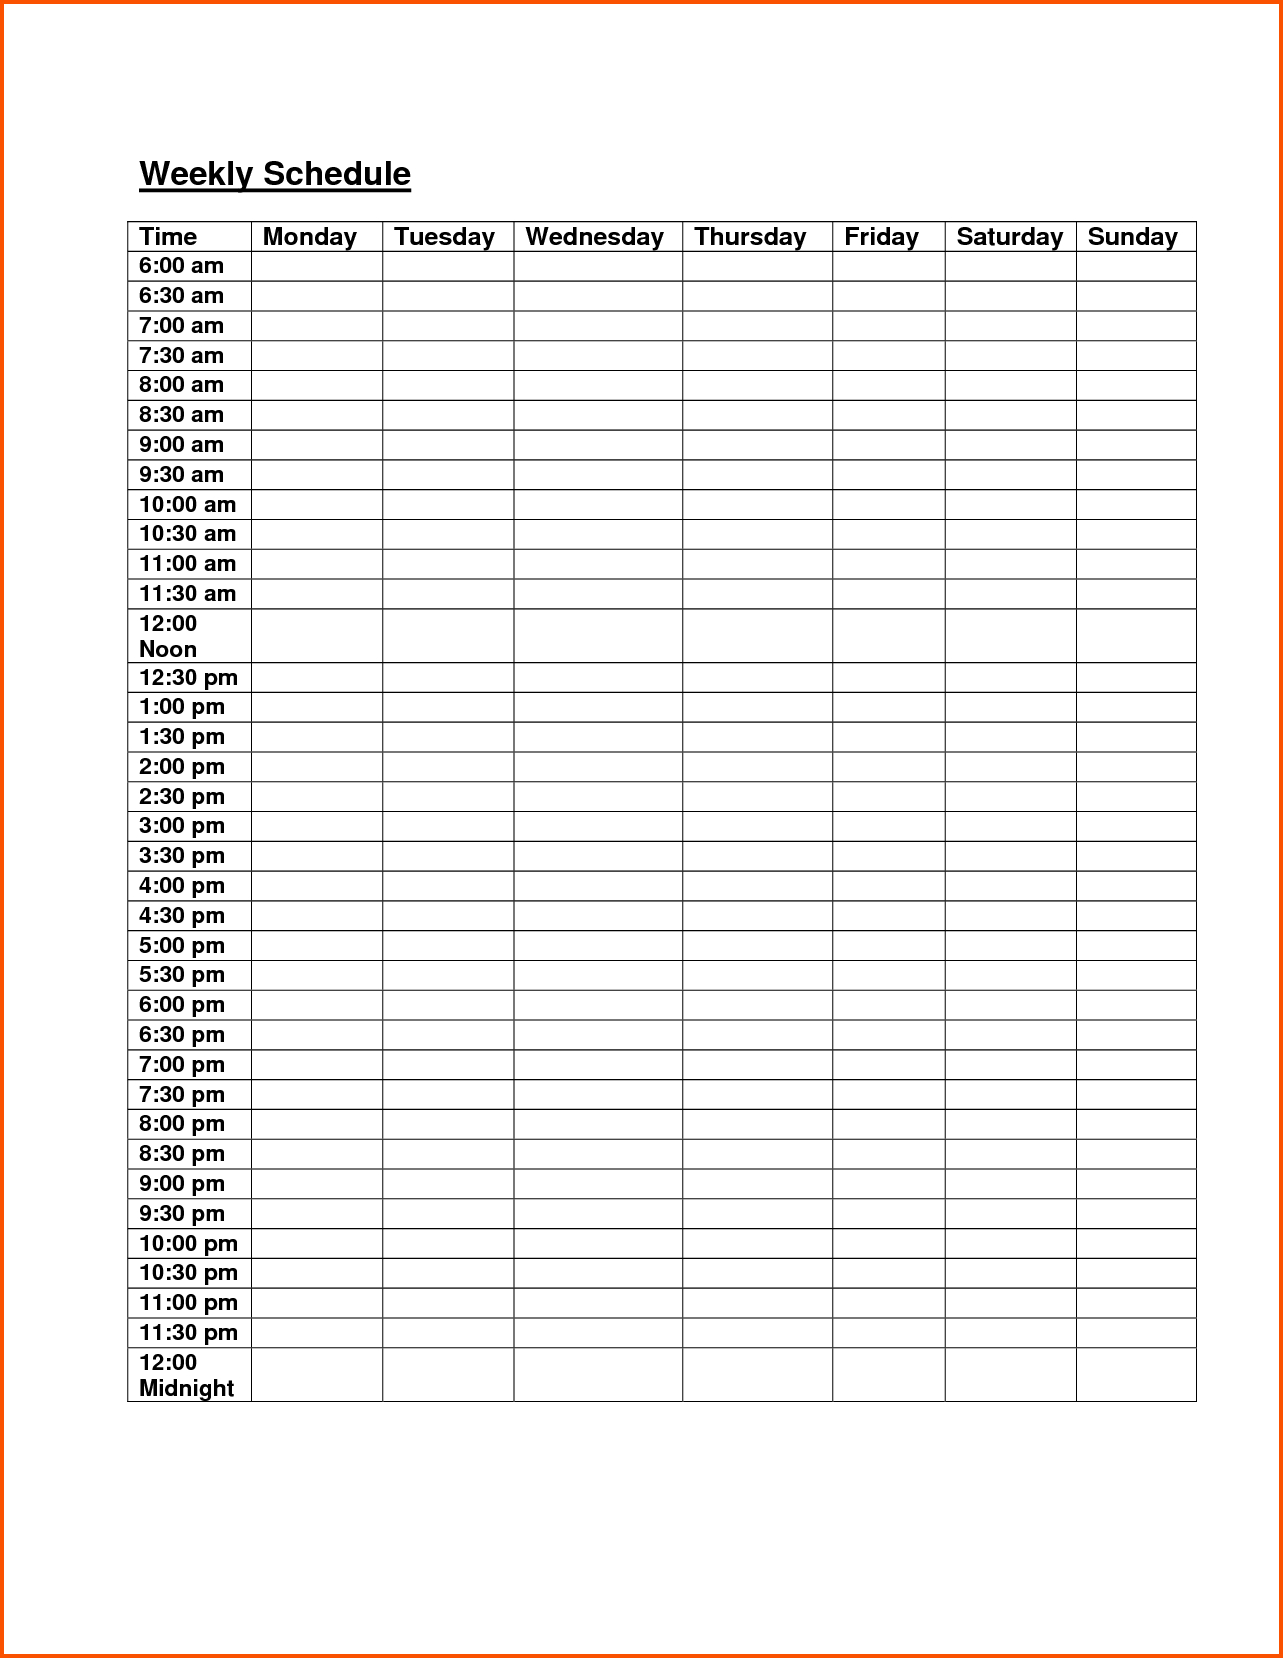 Free Weekly Class Schedule Template Excel #1 | Weekly with 24 Hour Planner Printable